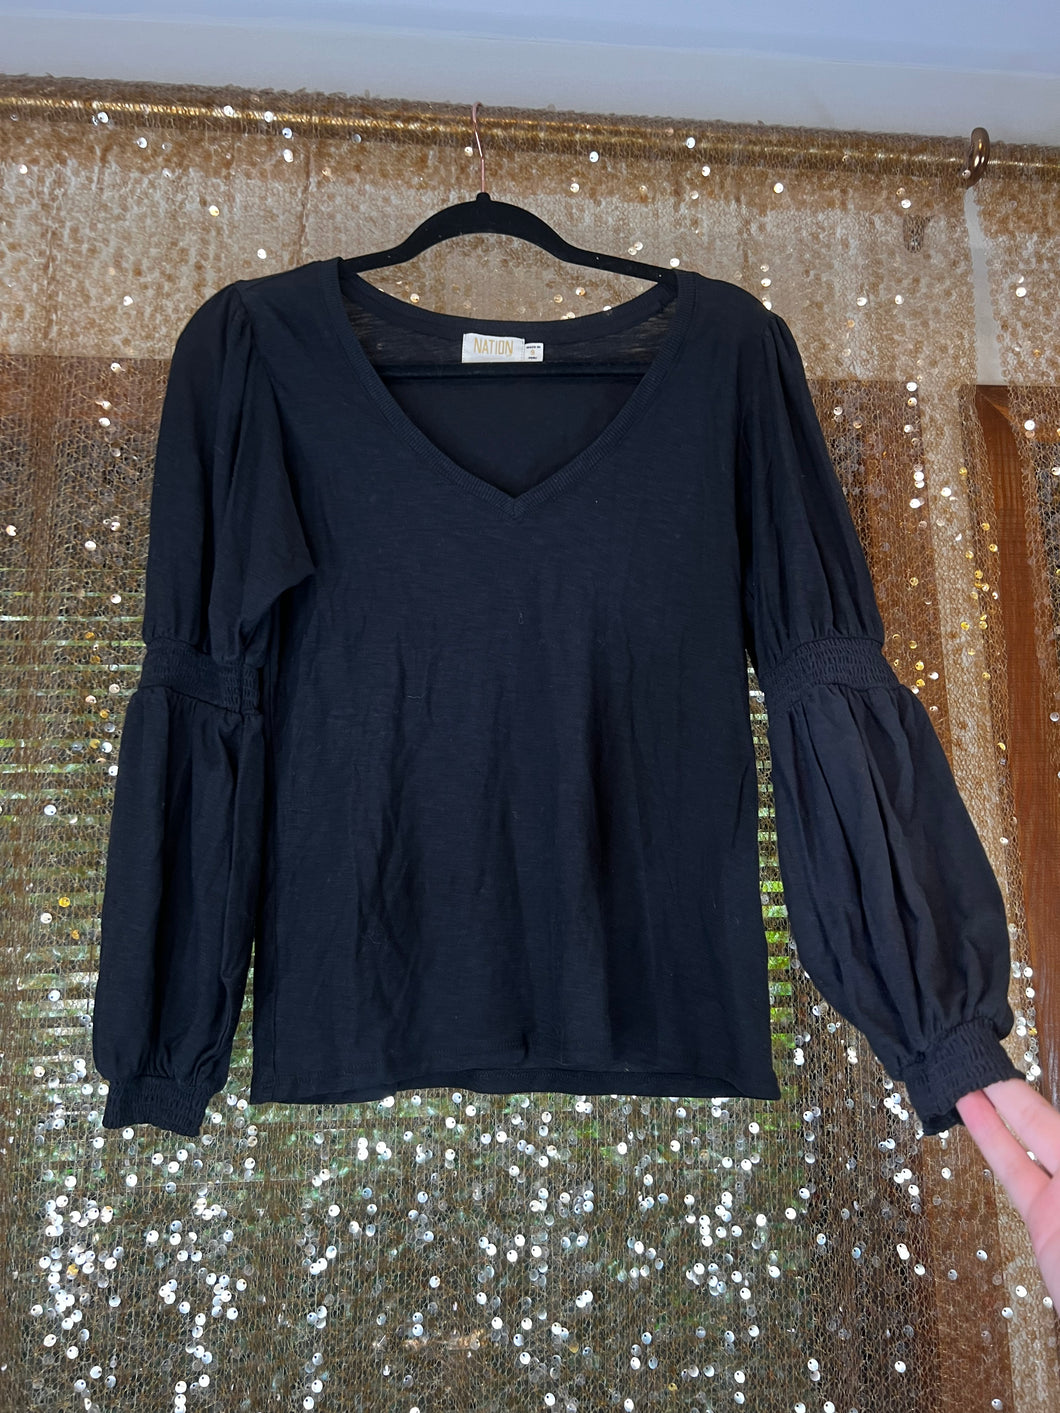 Bell style sleeved black top